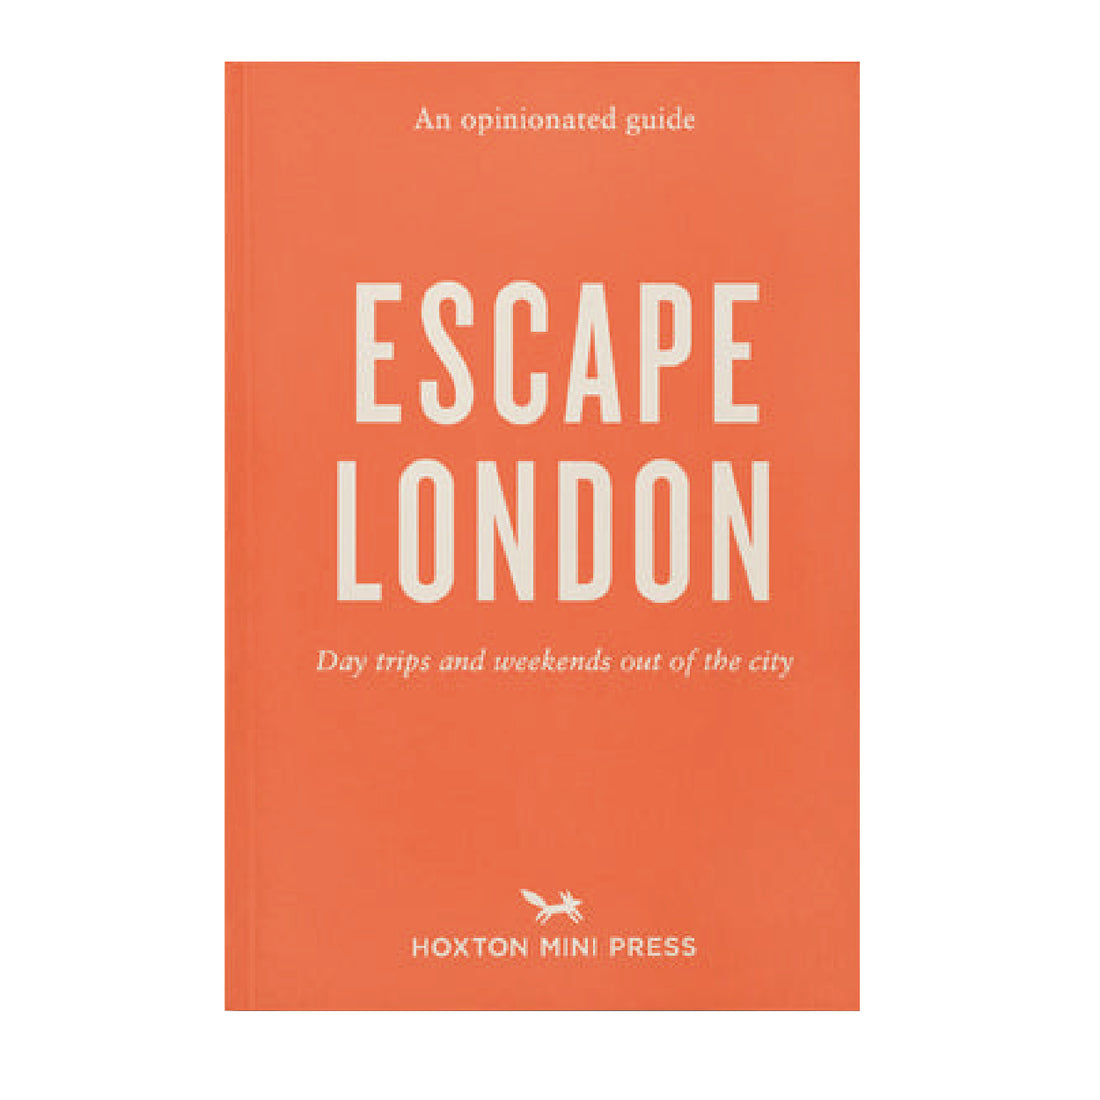 An Opinionated Guide To Escape London